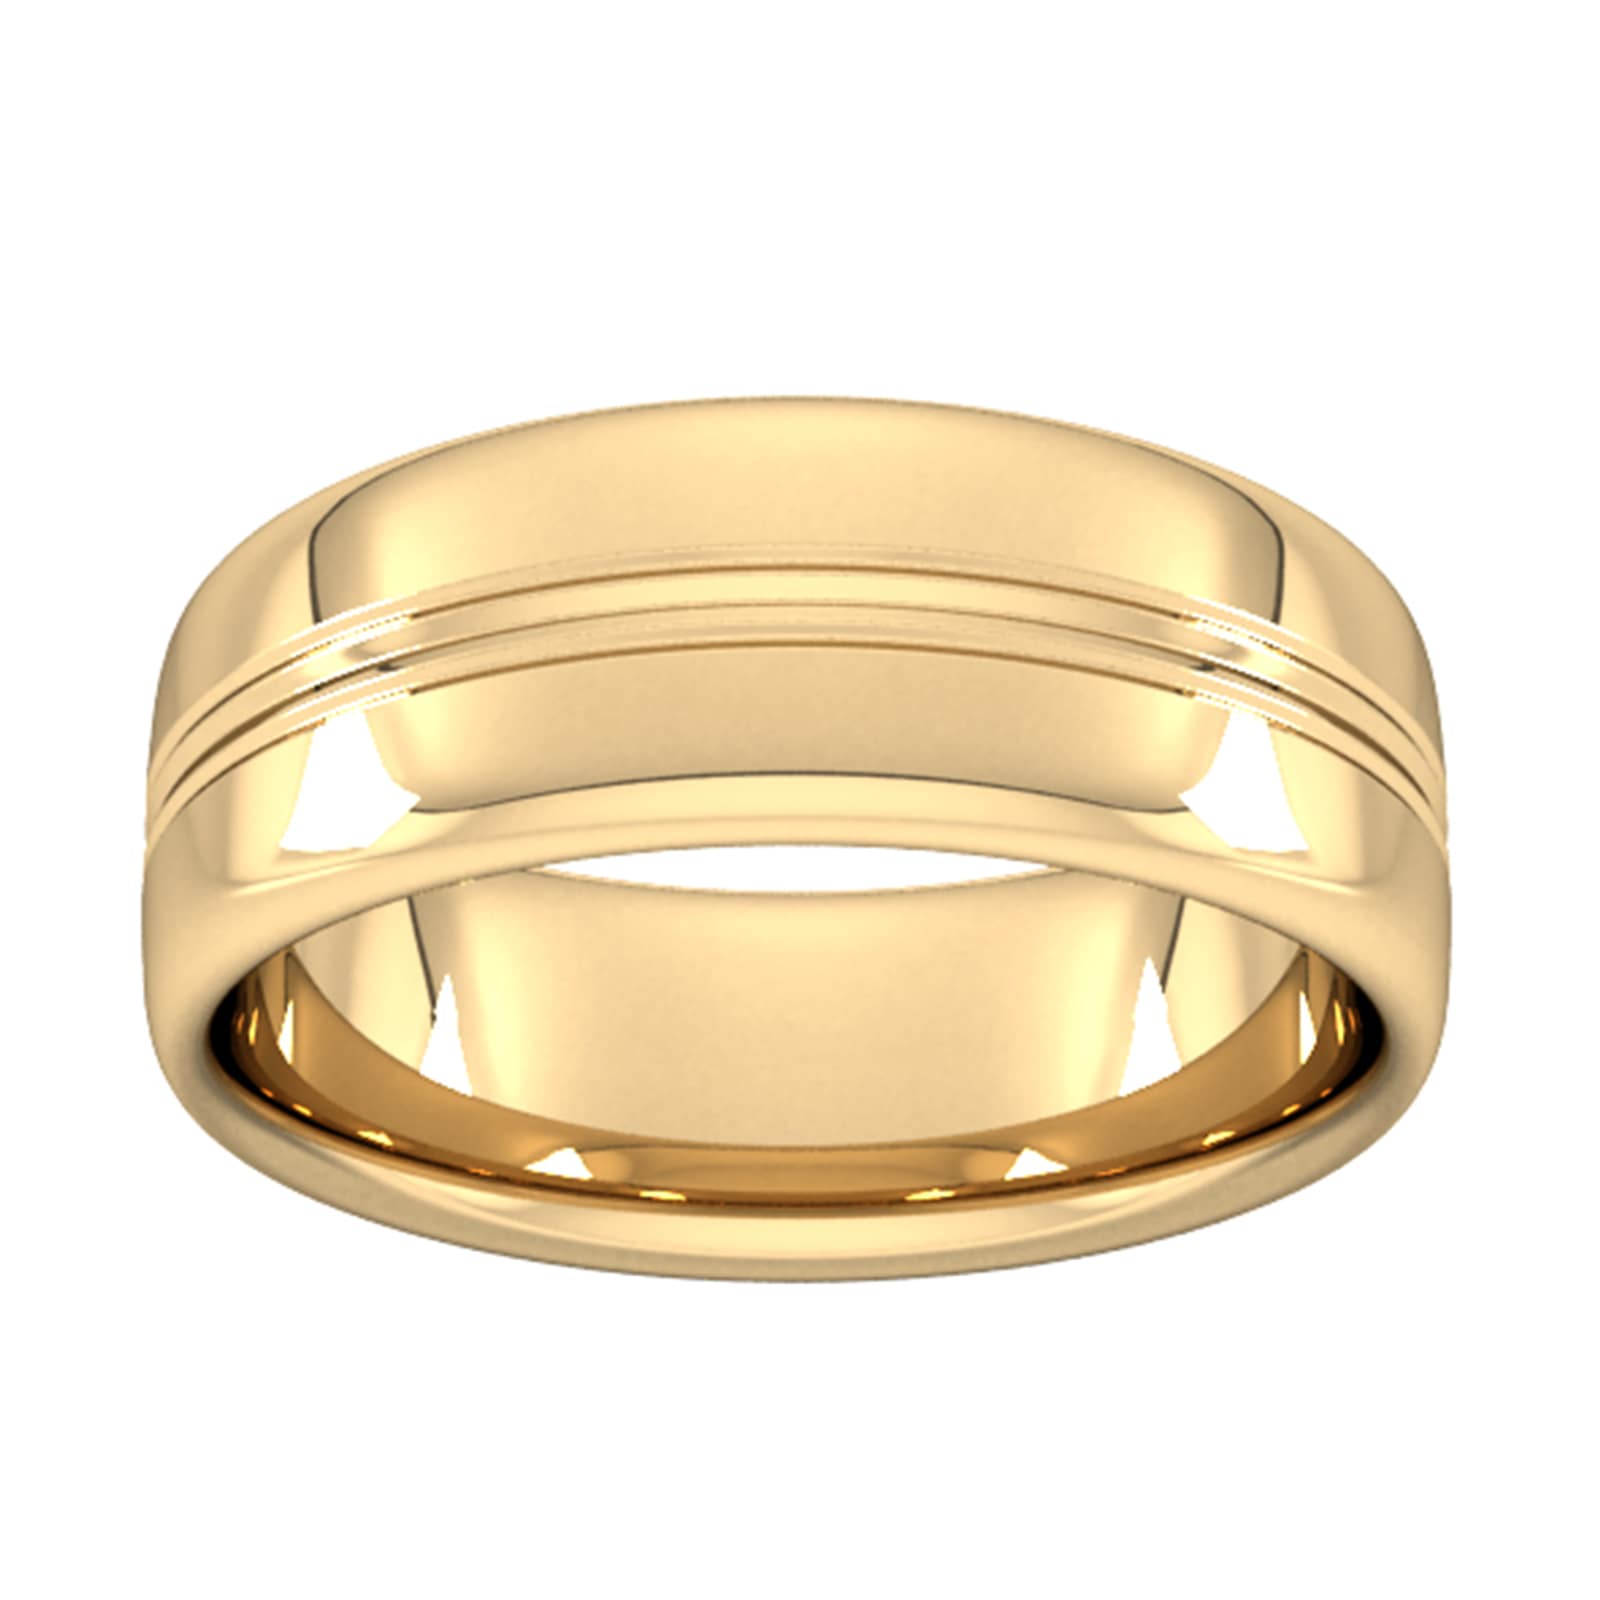 8mm Slight Court Standard Grooved Polished Finish Wedding Ring In 18 Carat Yellow Gold - Ring Size J